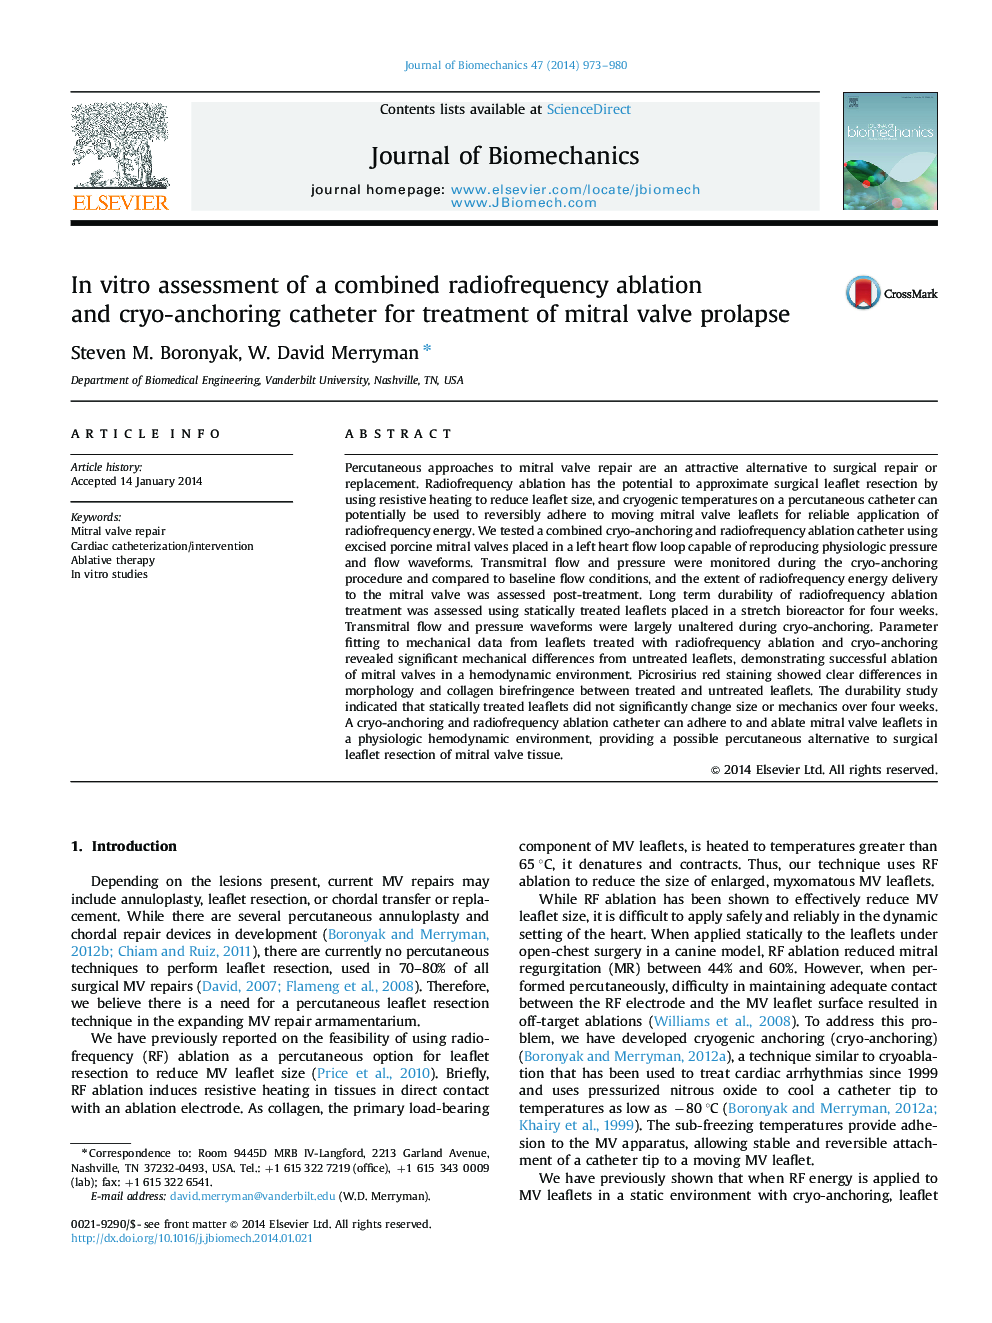 In vitro assessment of a combined radiofrequency ablation and cryo-anchoring catheter for treatment of mitral valve prolapse